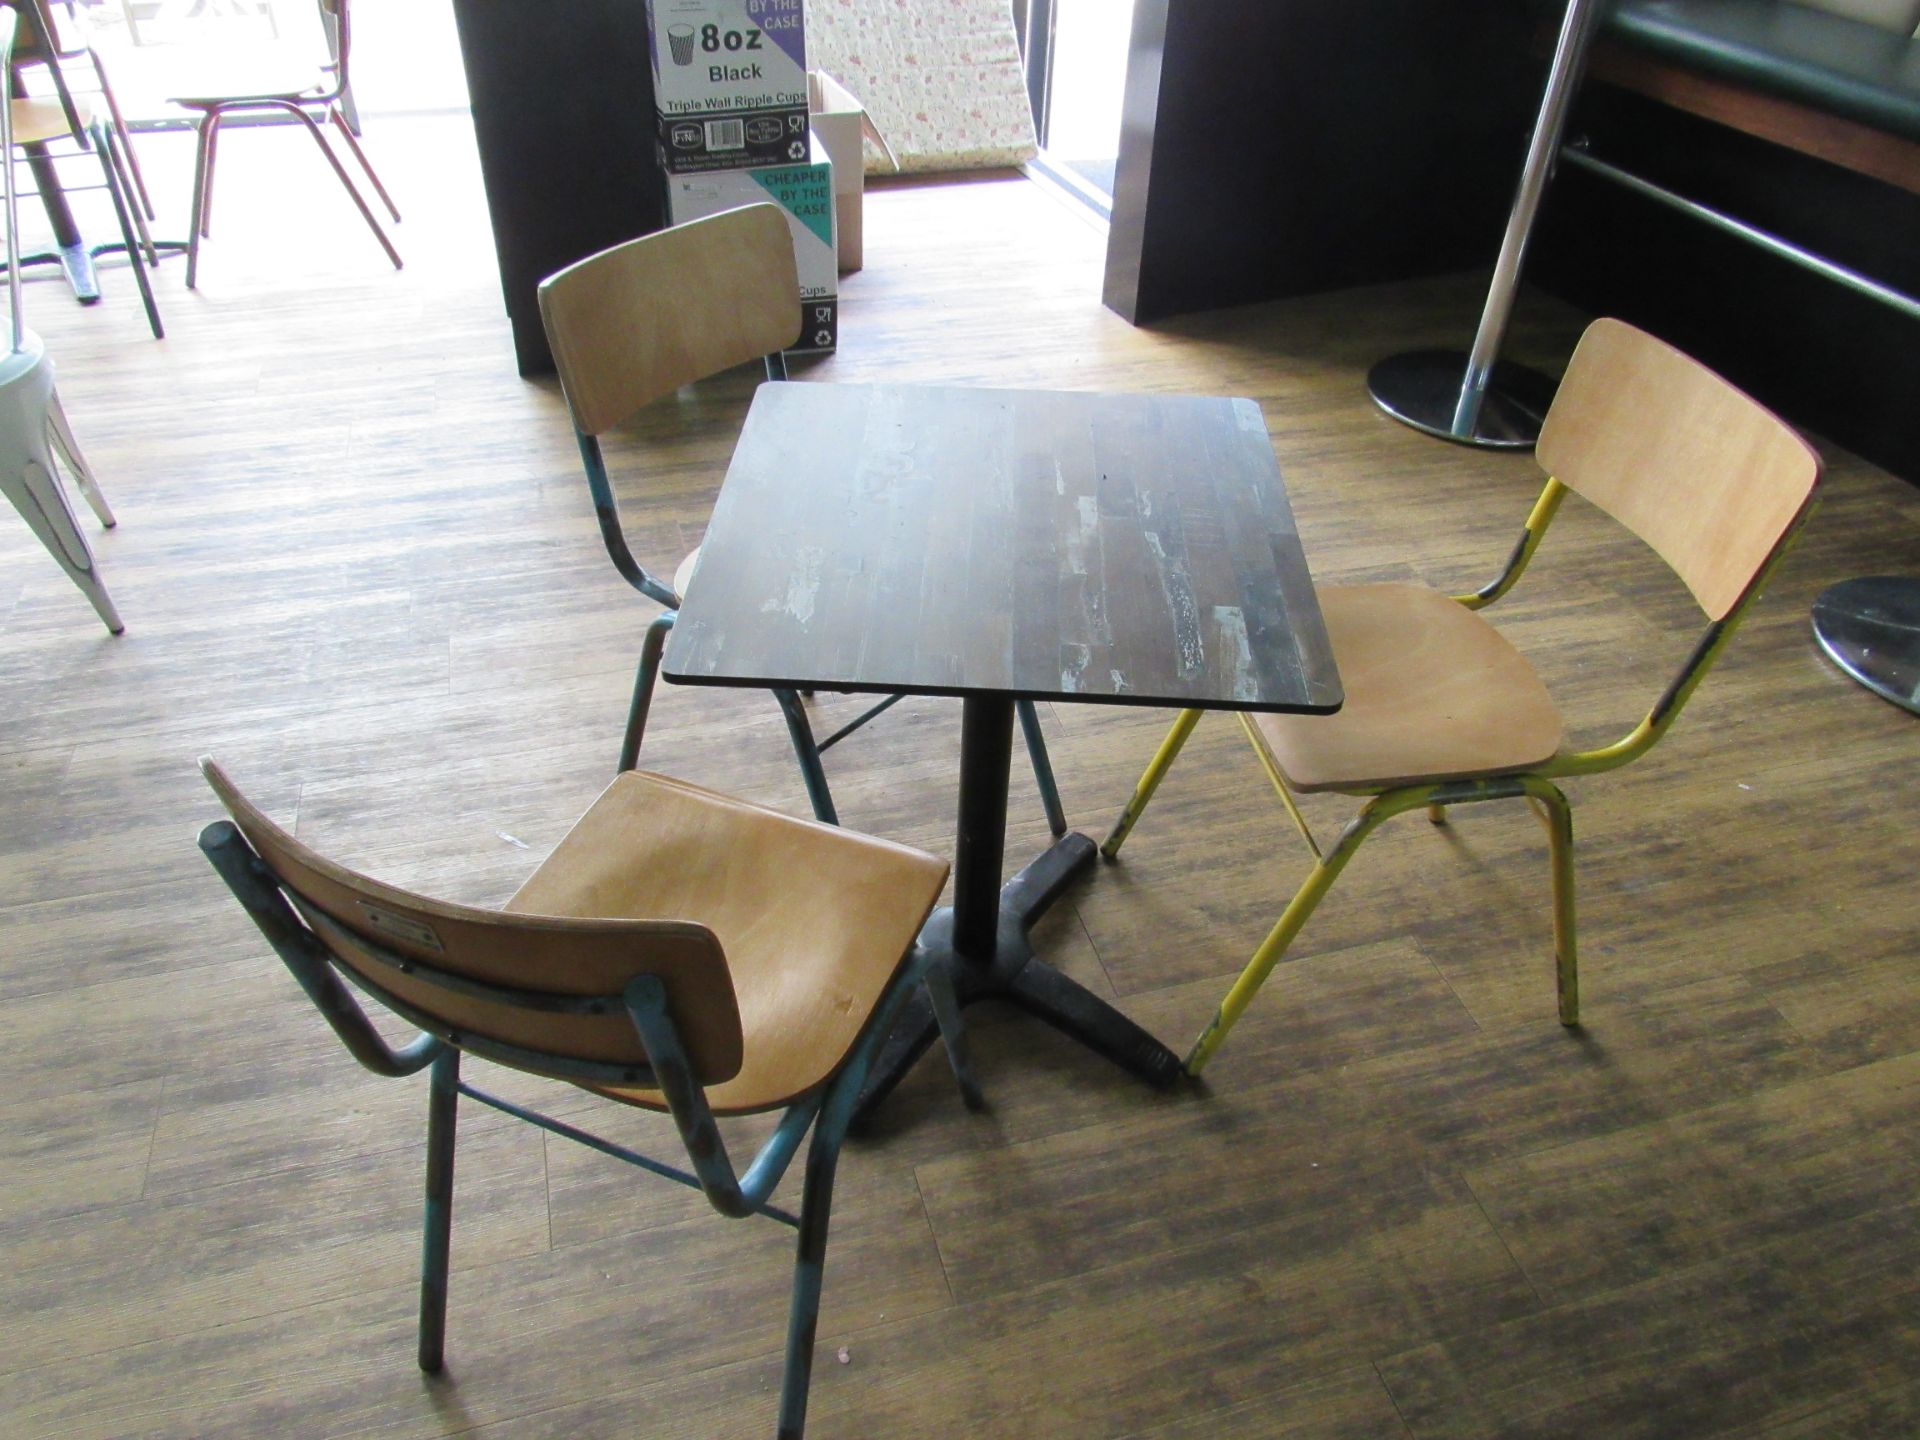 Café Table with 3 Retro Chairs - Image 3 of 4